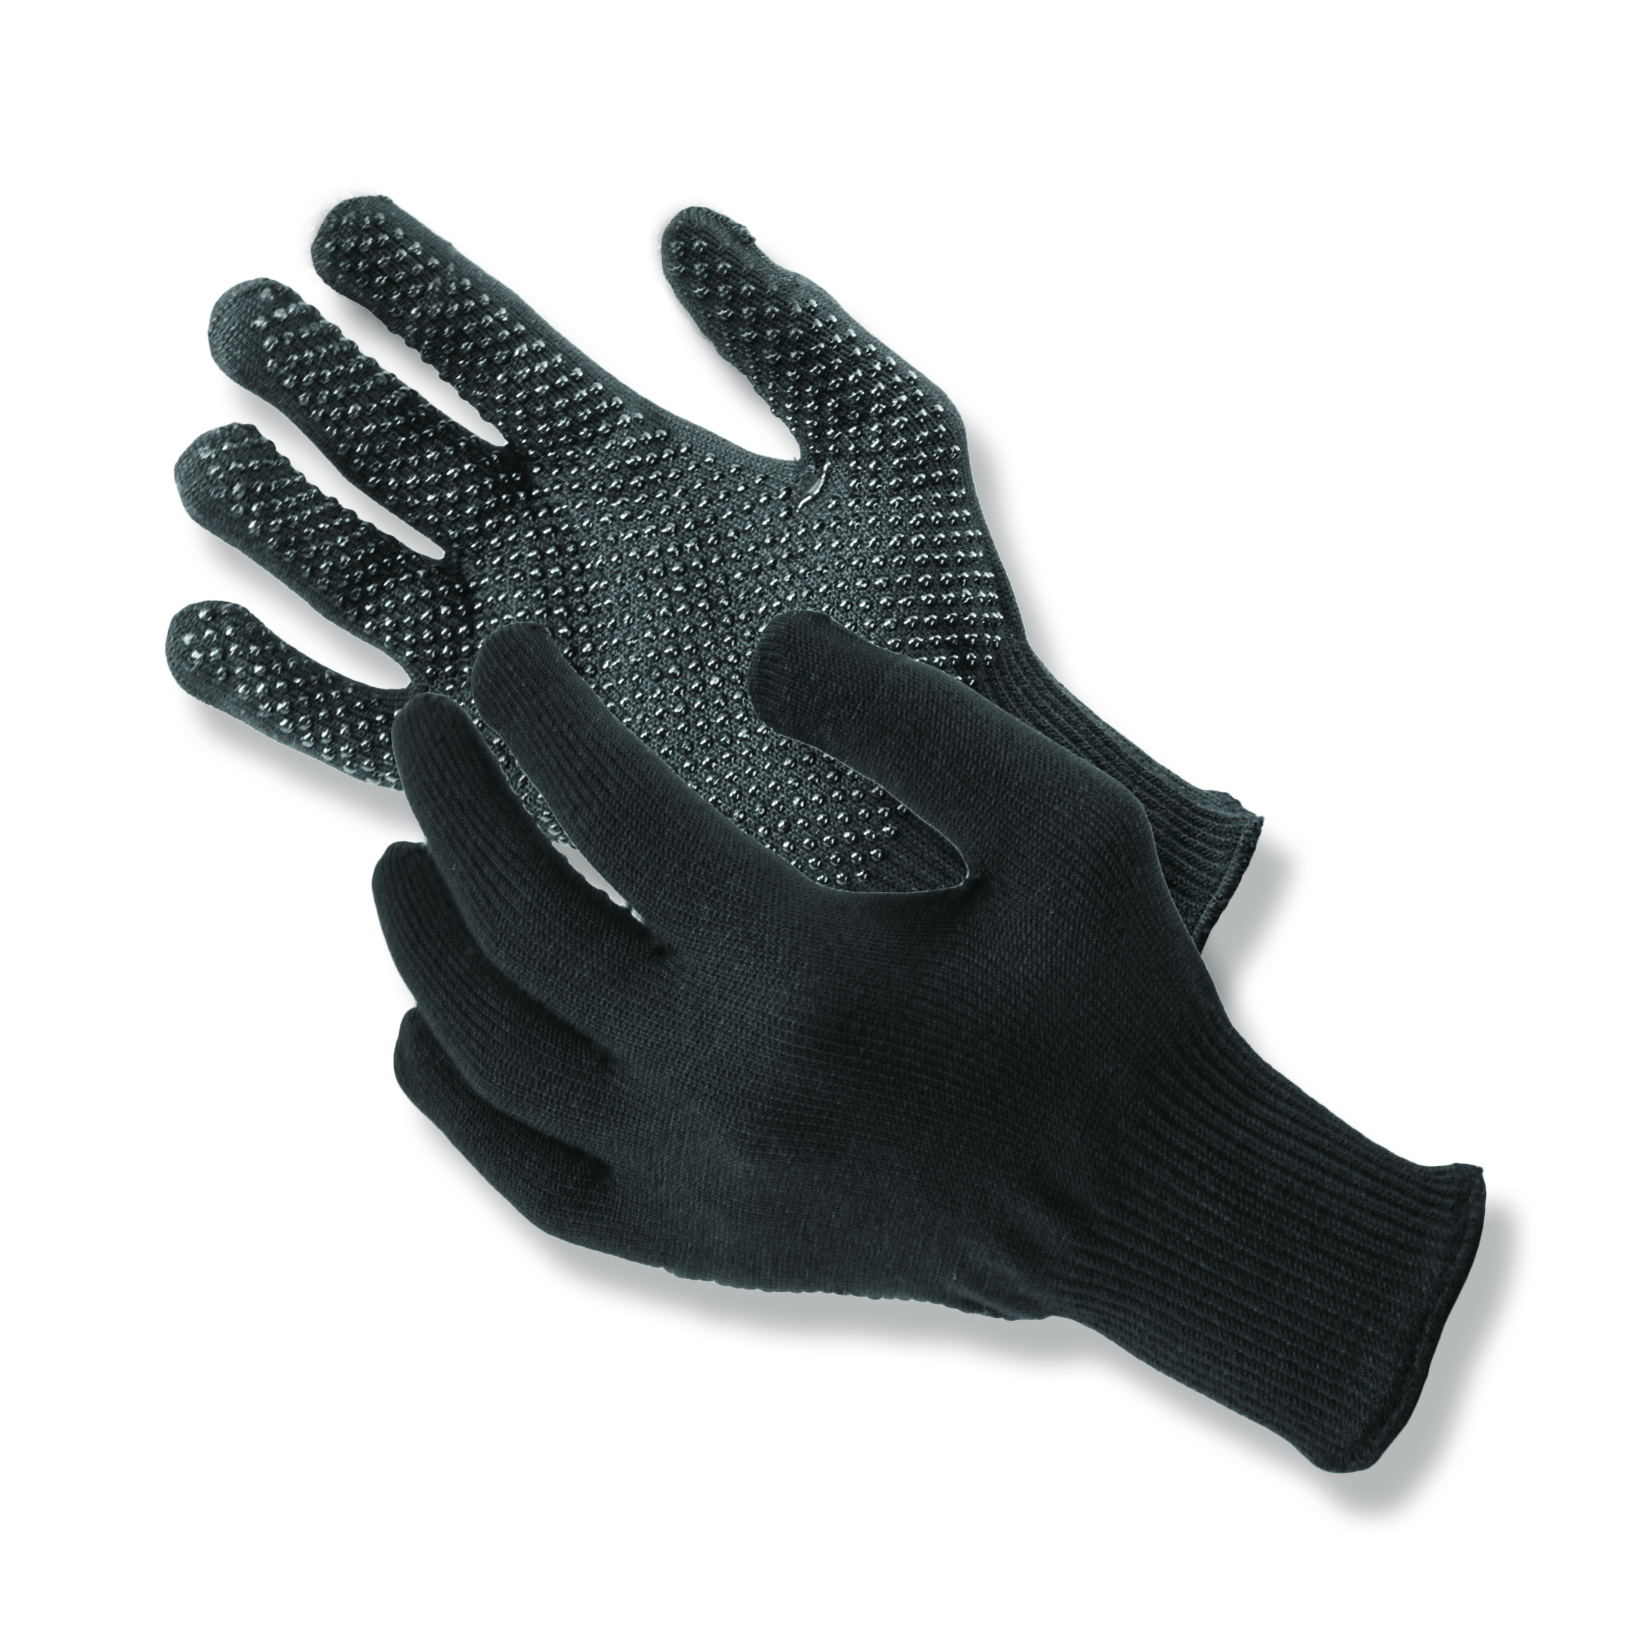 Mens Warm Stretchy Magic Gripper Gloves in Black with Dotted Grips